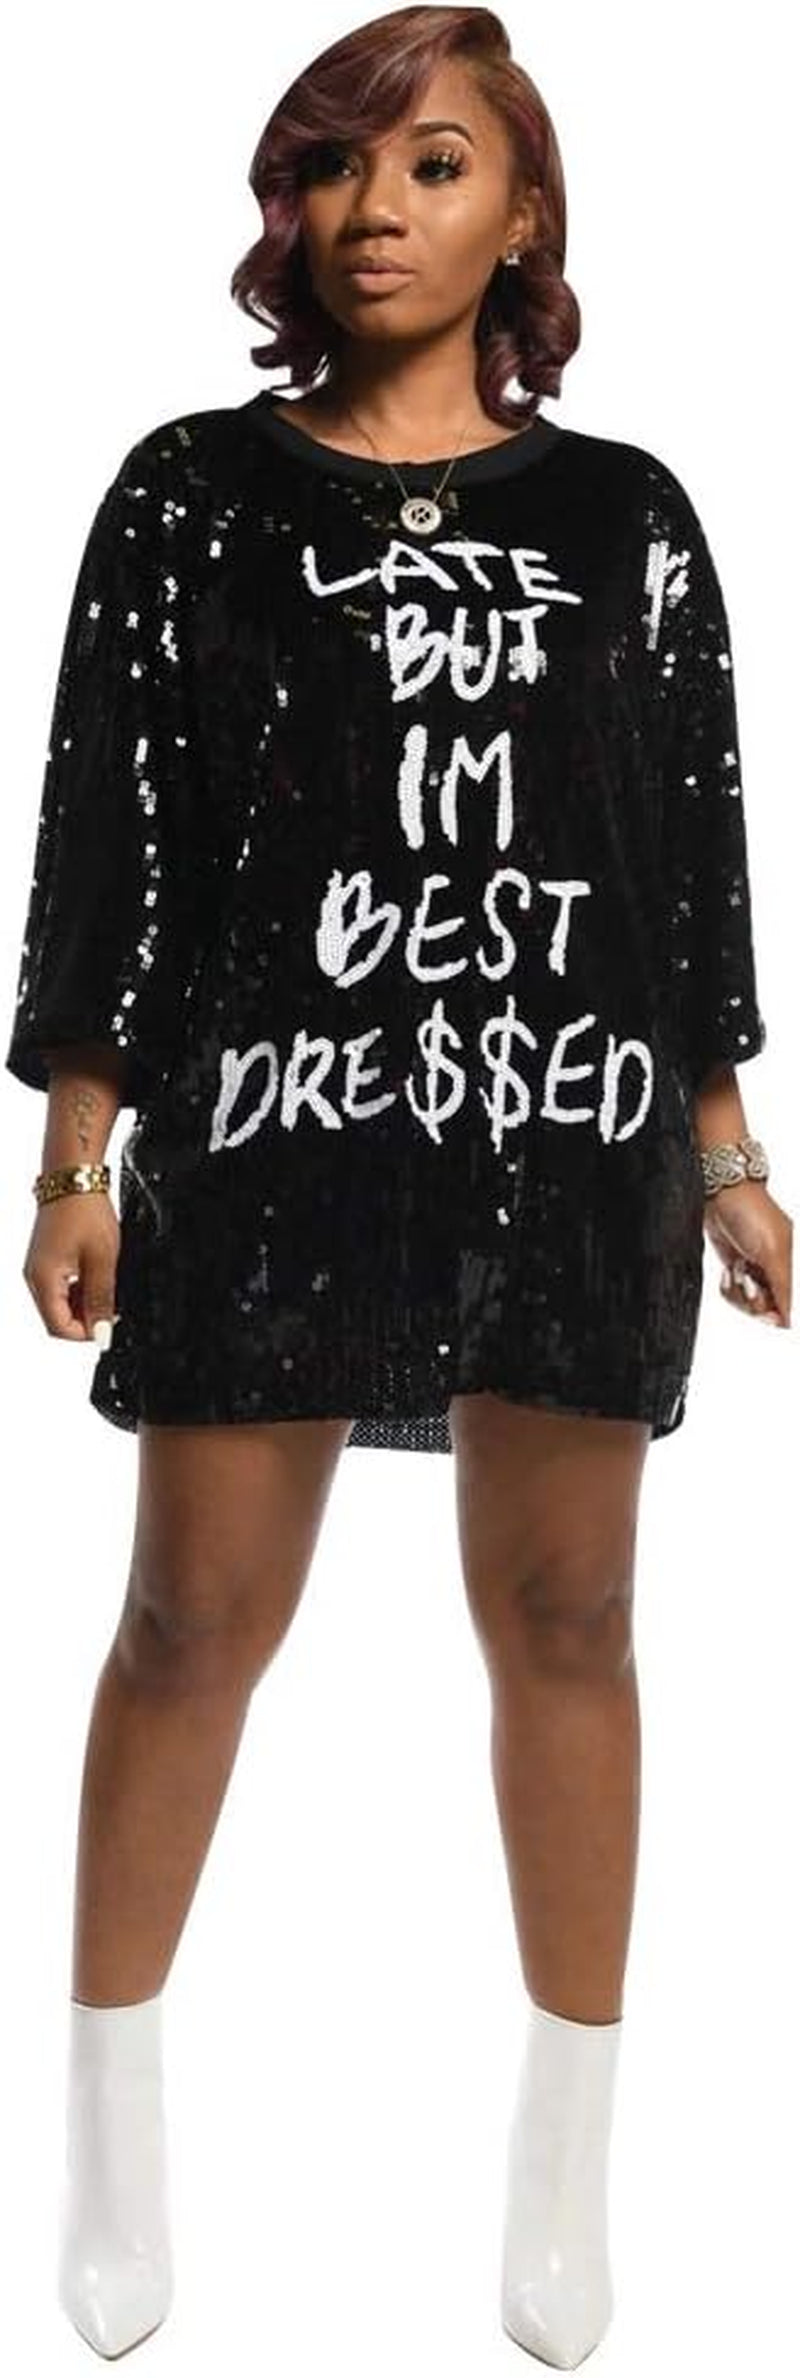 Womens Sequin Glitter Shirt Dress - Sexy Letter Print 3/4 Sleeve Short Dresses Party Club Outfits